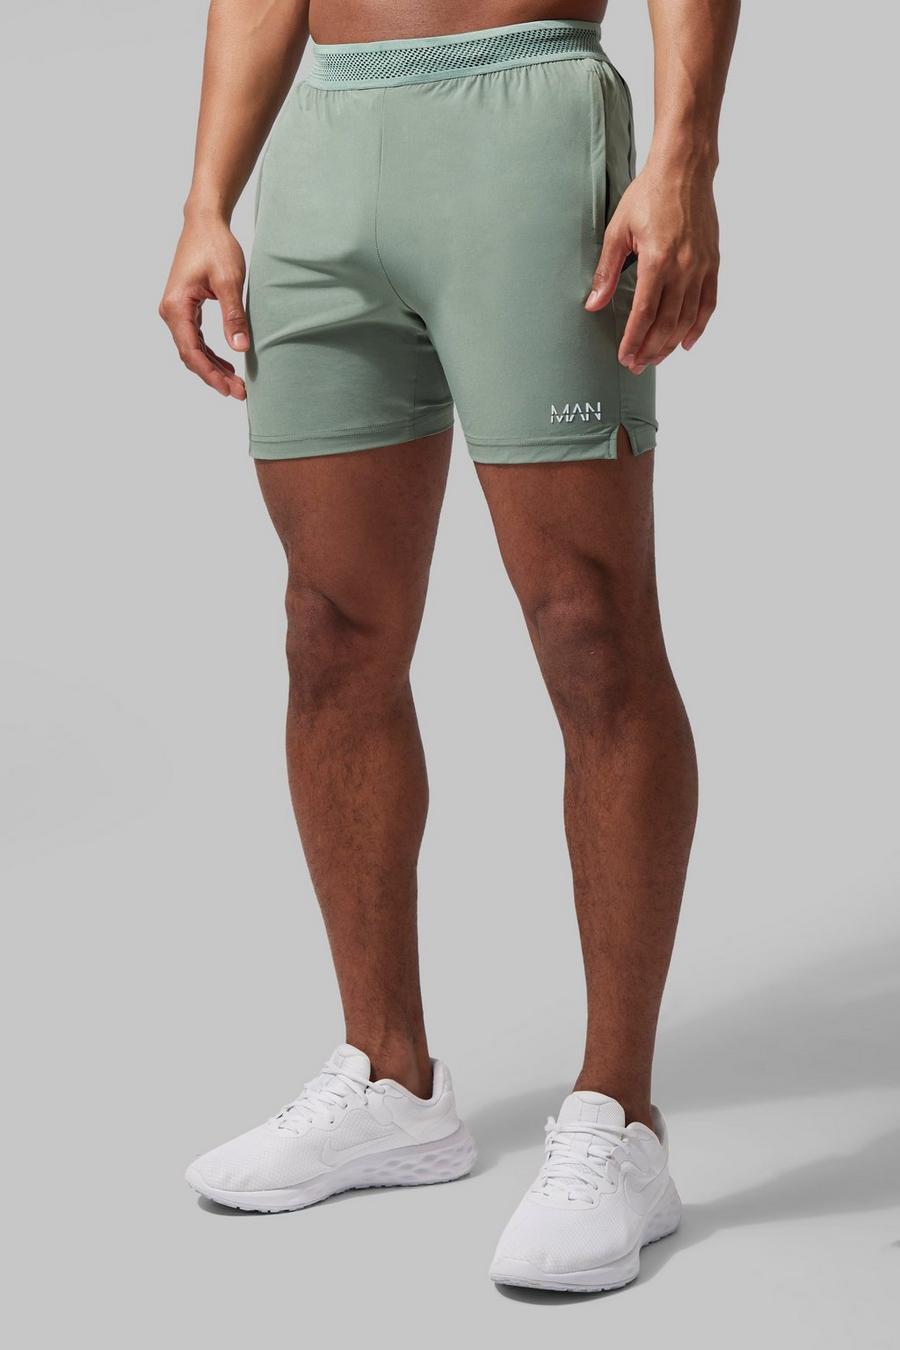 Man Active Performance-Shorts, Green image number 1